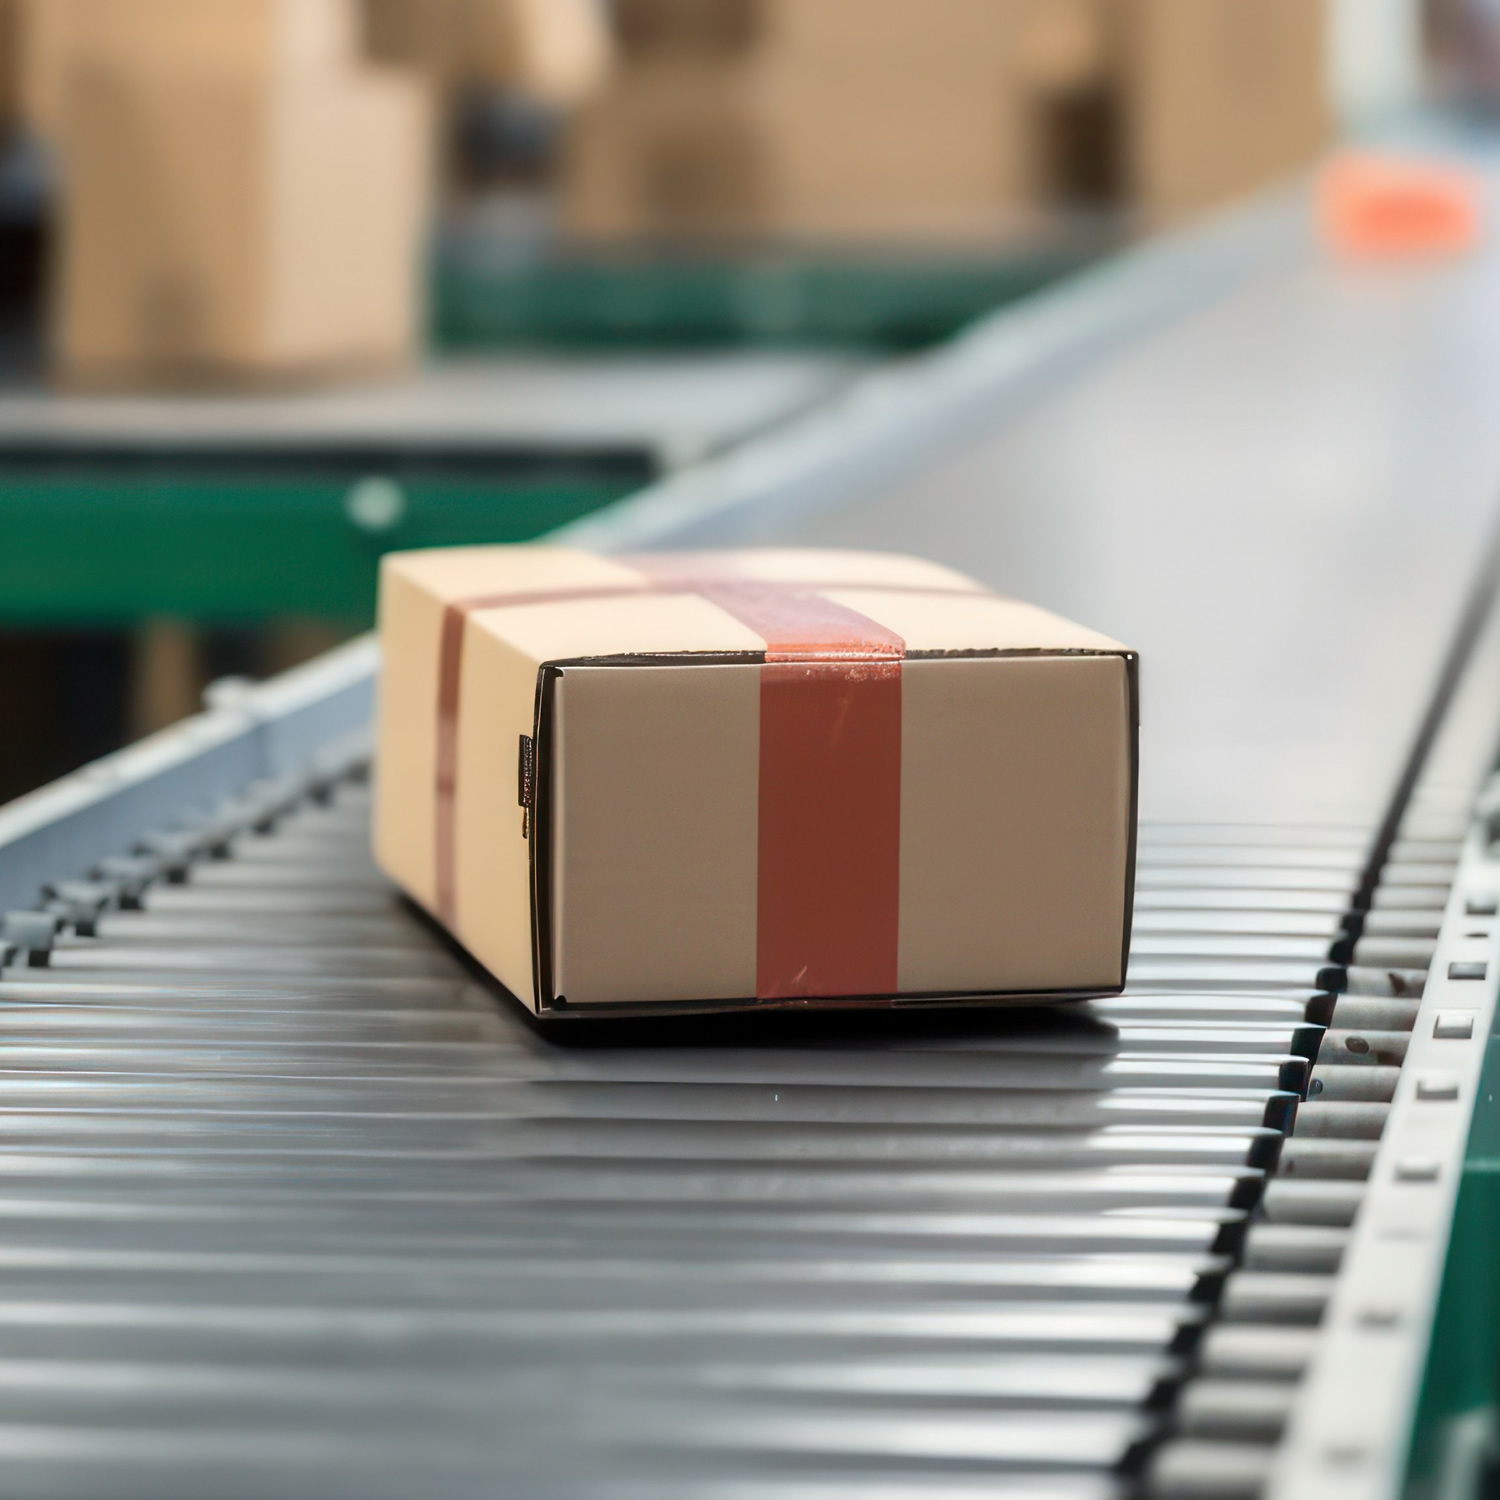 A single cardboard box with red tape moves along a conveyor belt in the warehouse.